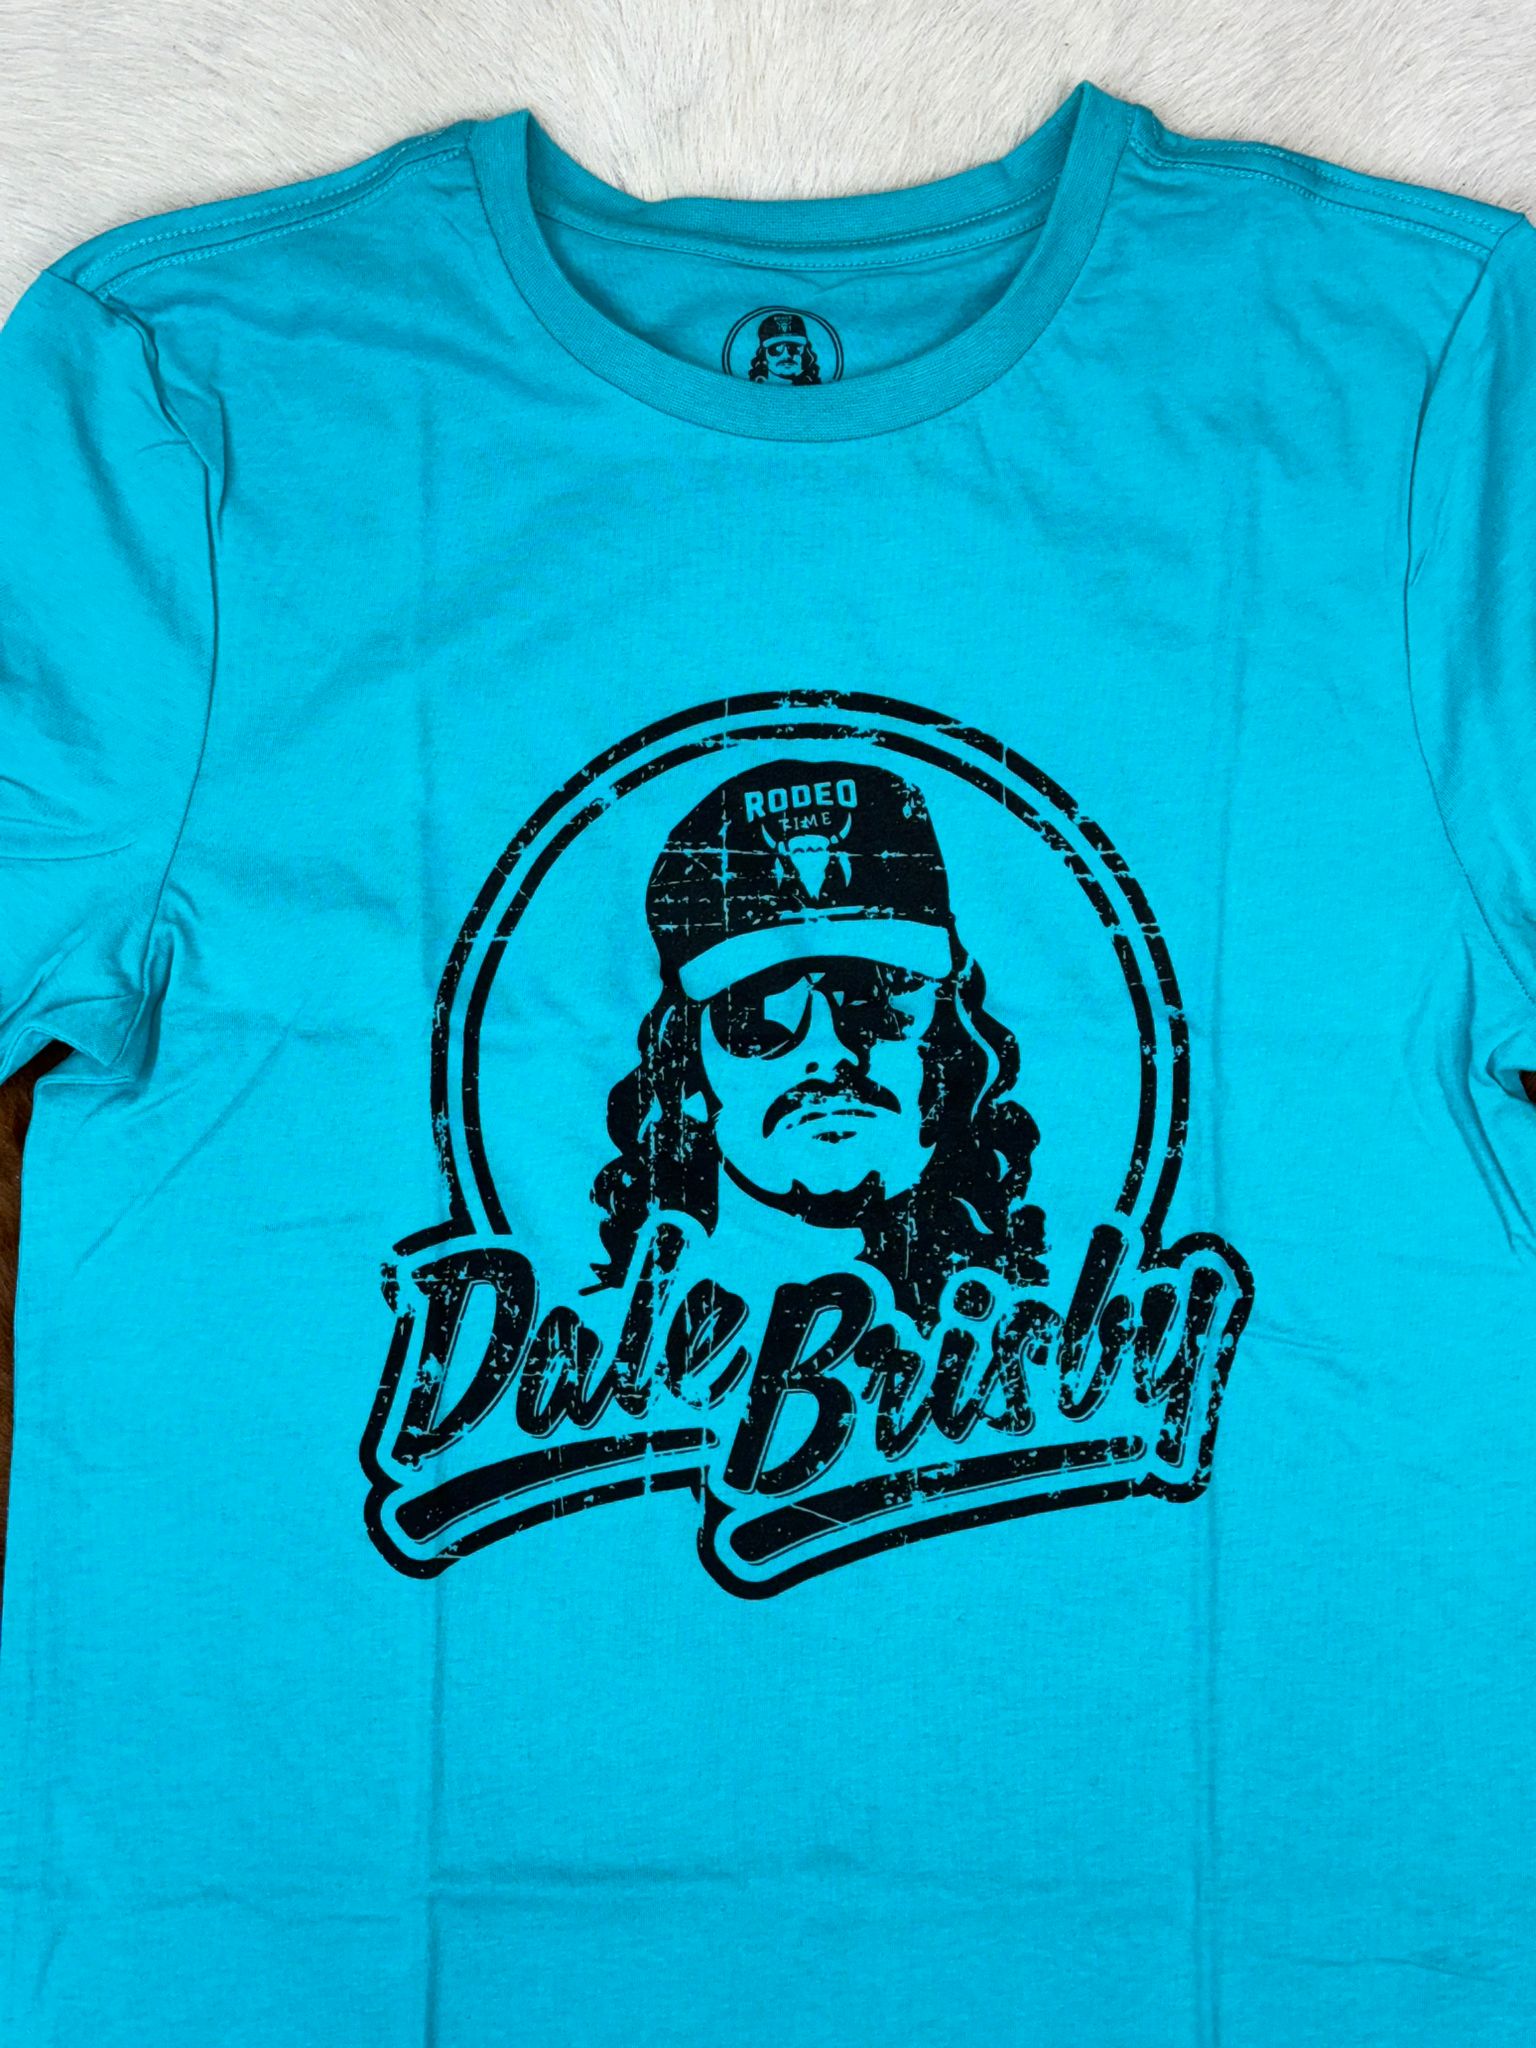 DALE BRISBY X ROCK&ROLL GRAPHIC TEE TURQUOISE SHORT SLEEVE T-SHIRT